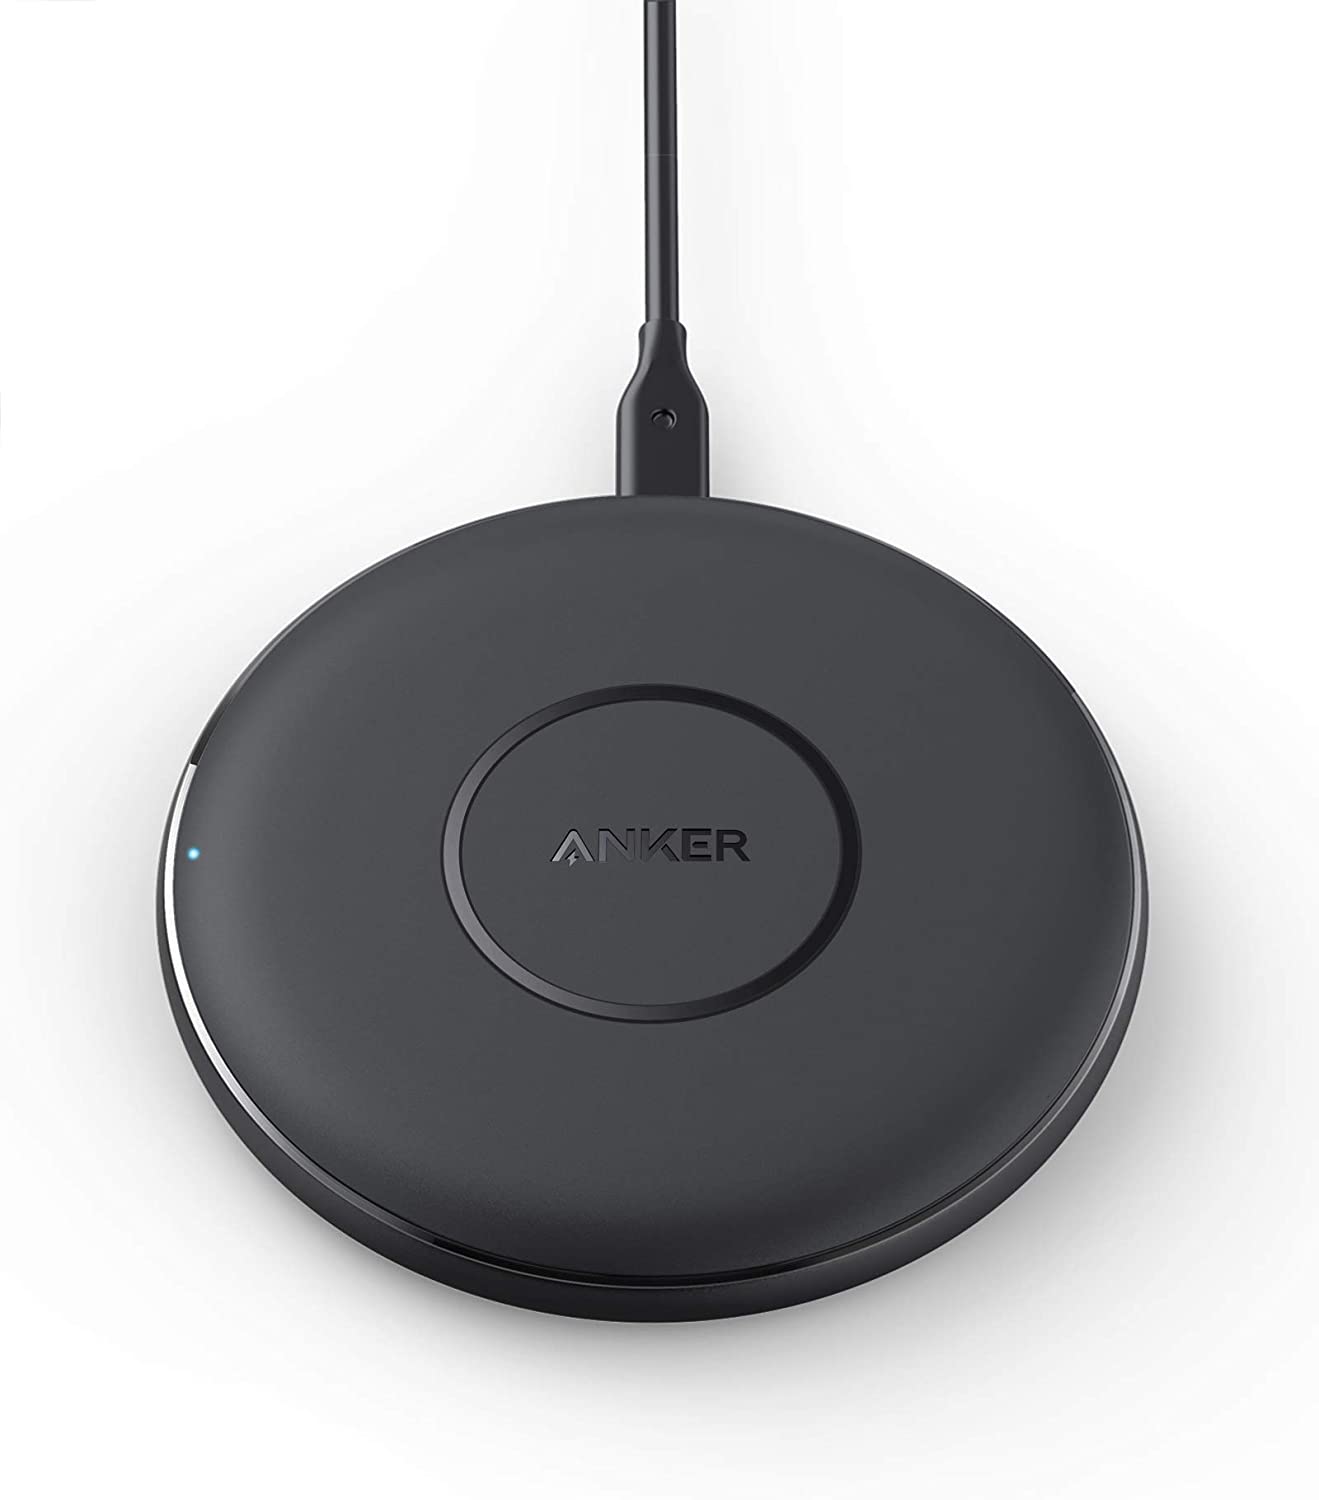 Anker PowerWave Pad 7.5/10W Wireless Charger (No AC Adapter) $7 + Shipping is free w/ Prime or on $25+